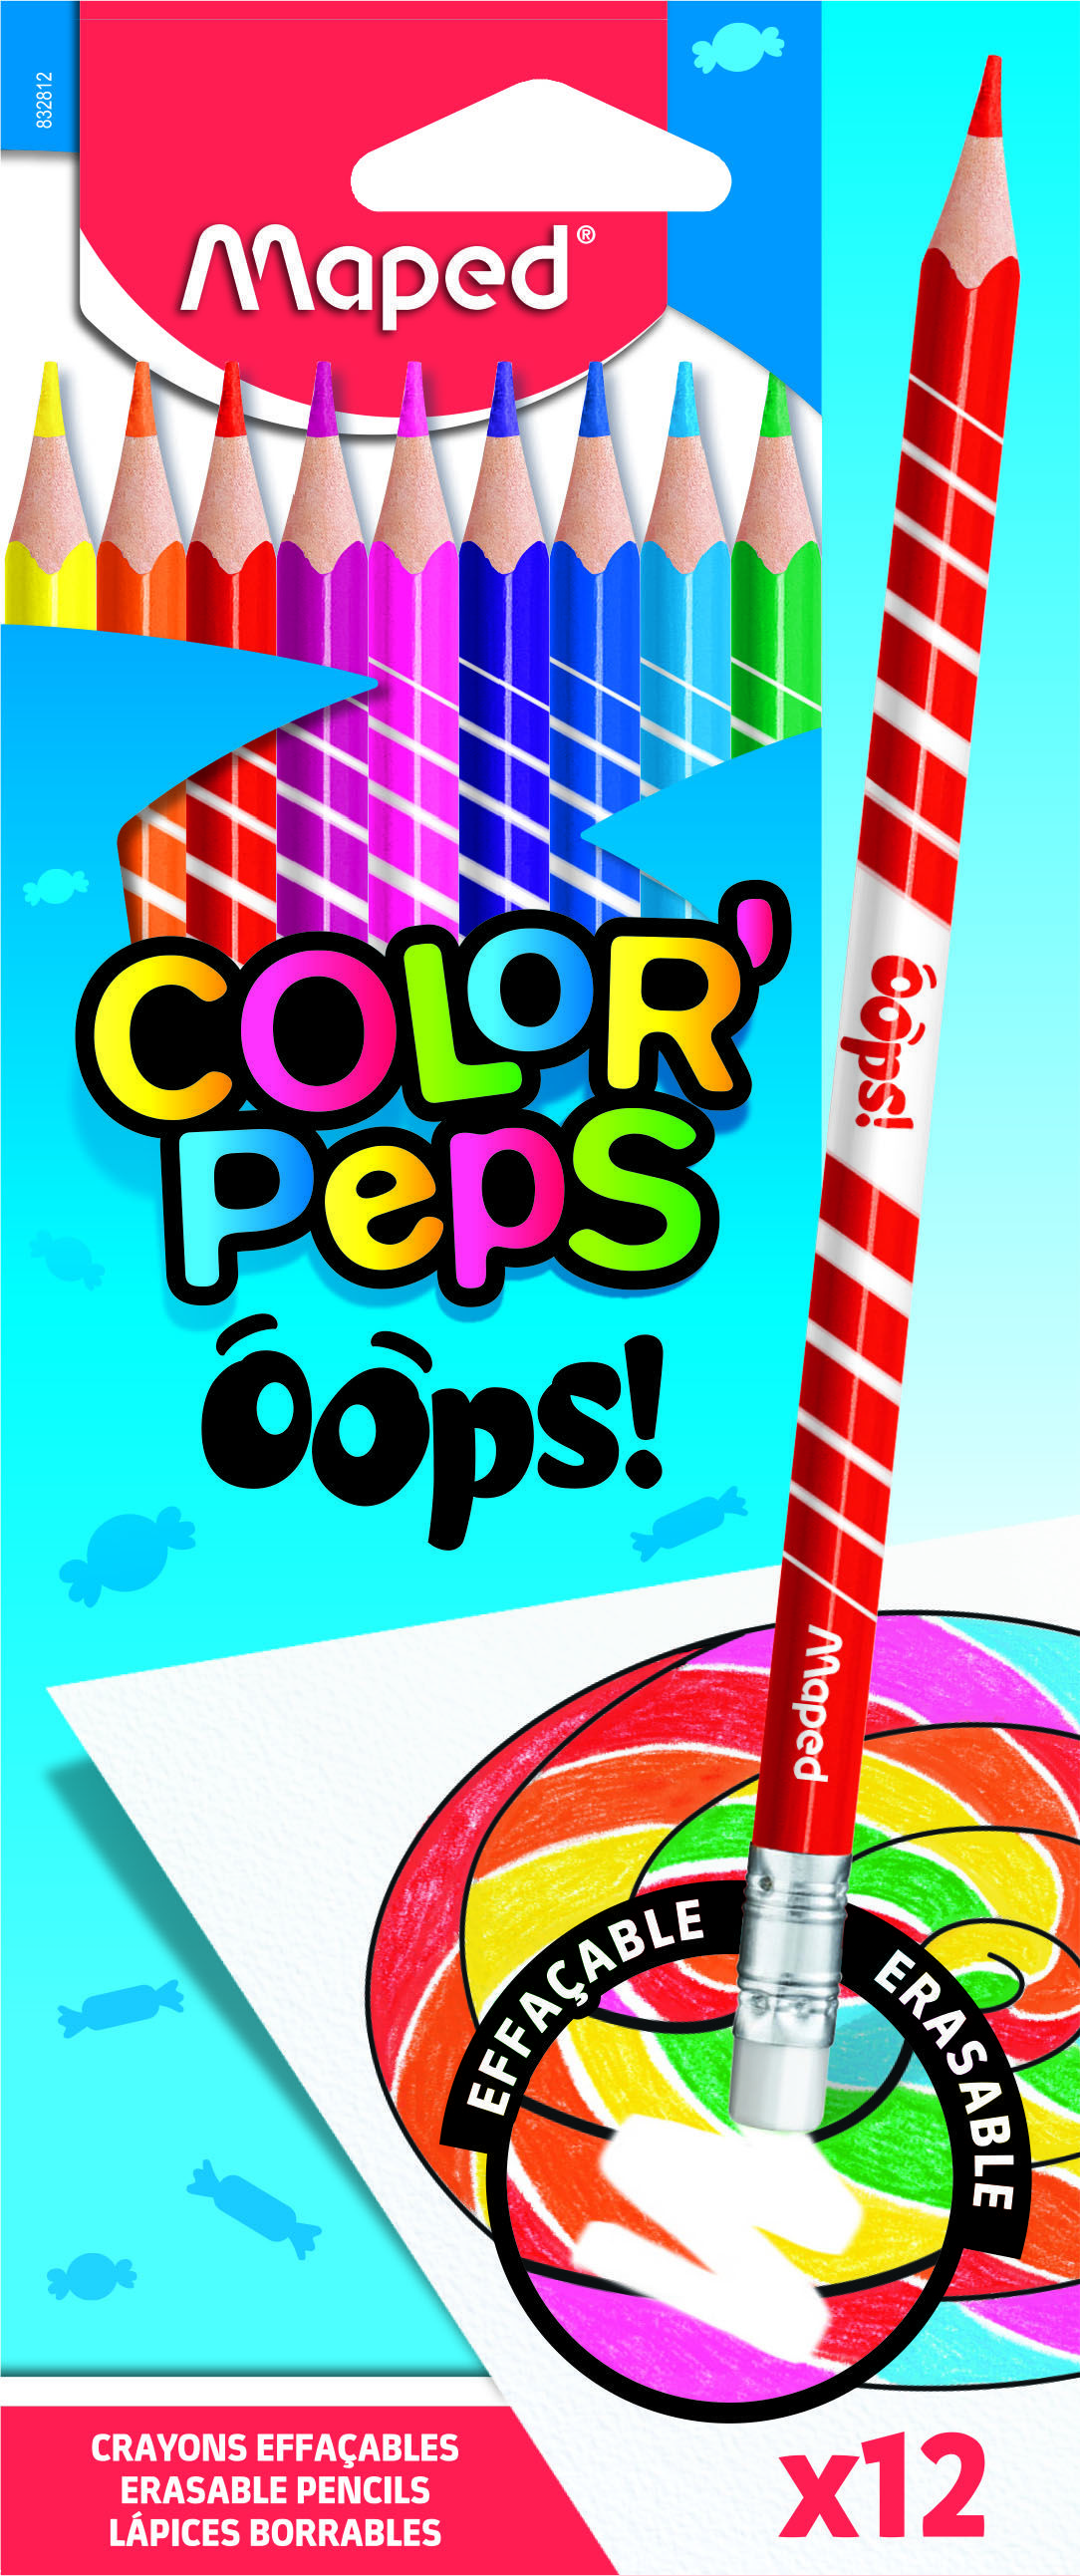   MAPED COLOR'PEPS OOPS , 12 , ,   ,   